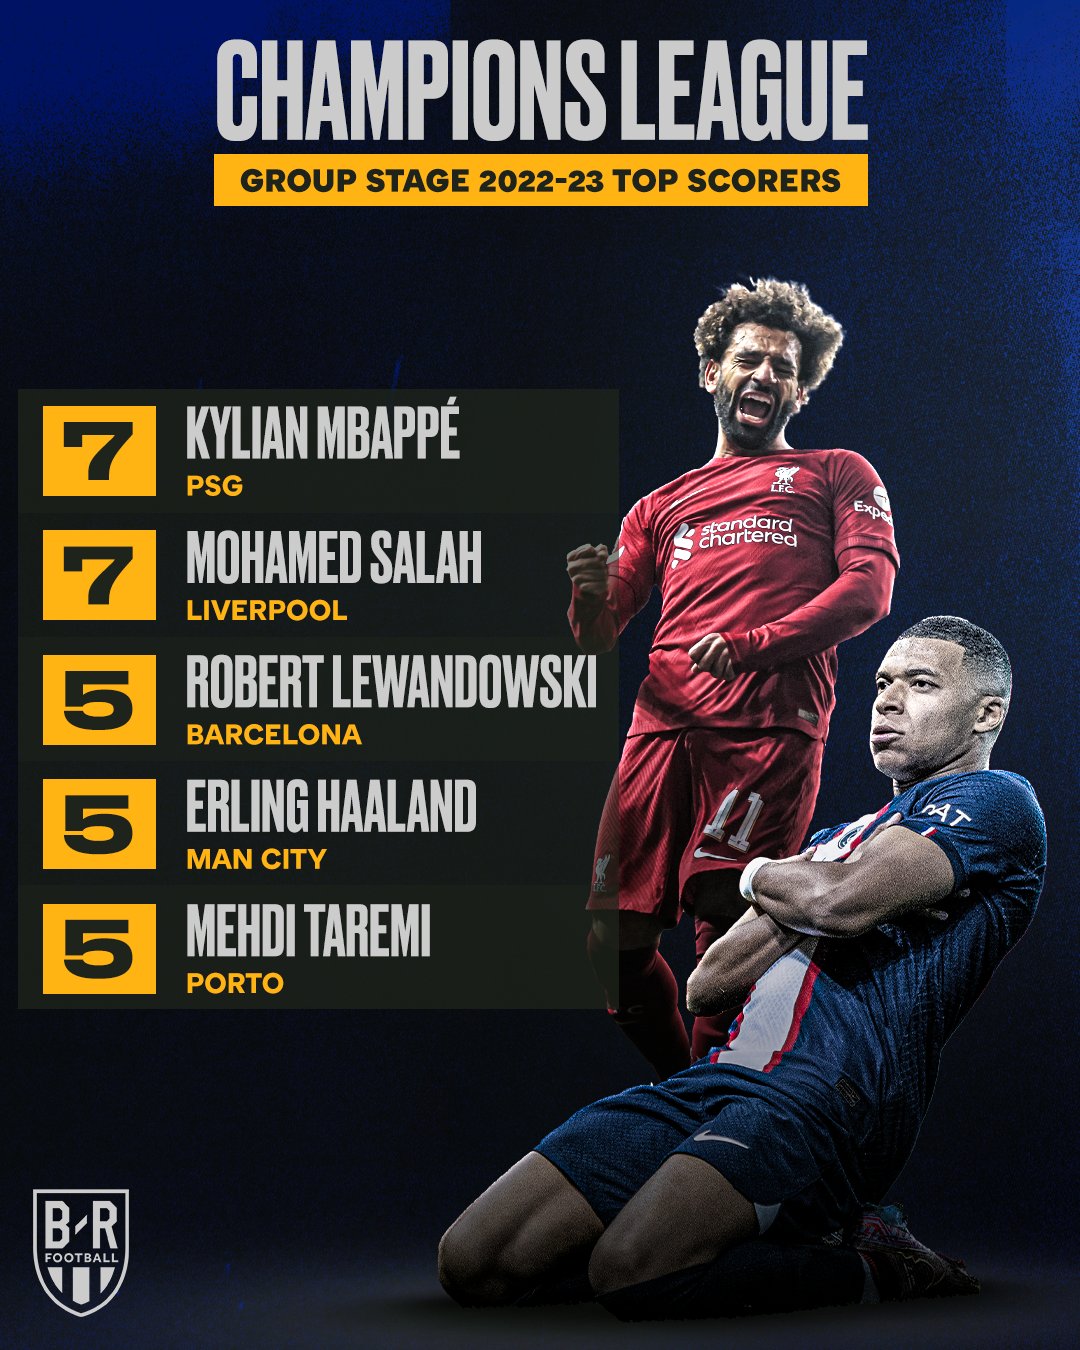 Champions League top scorers in group stage: Mbappe & Salah tied